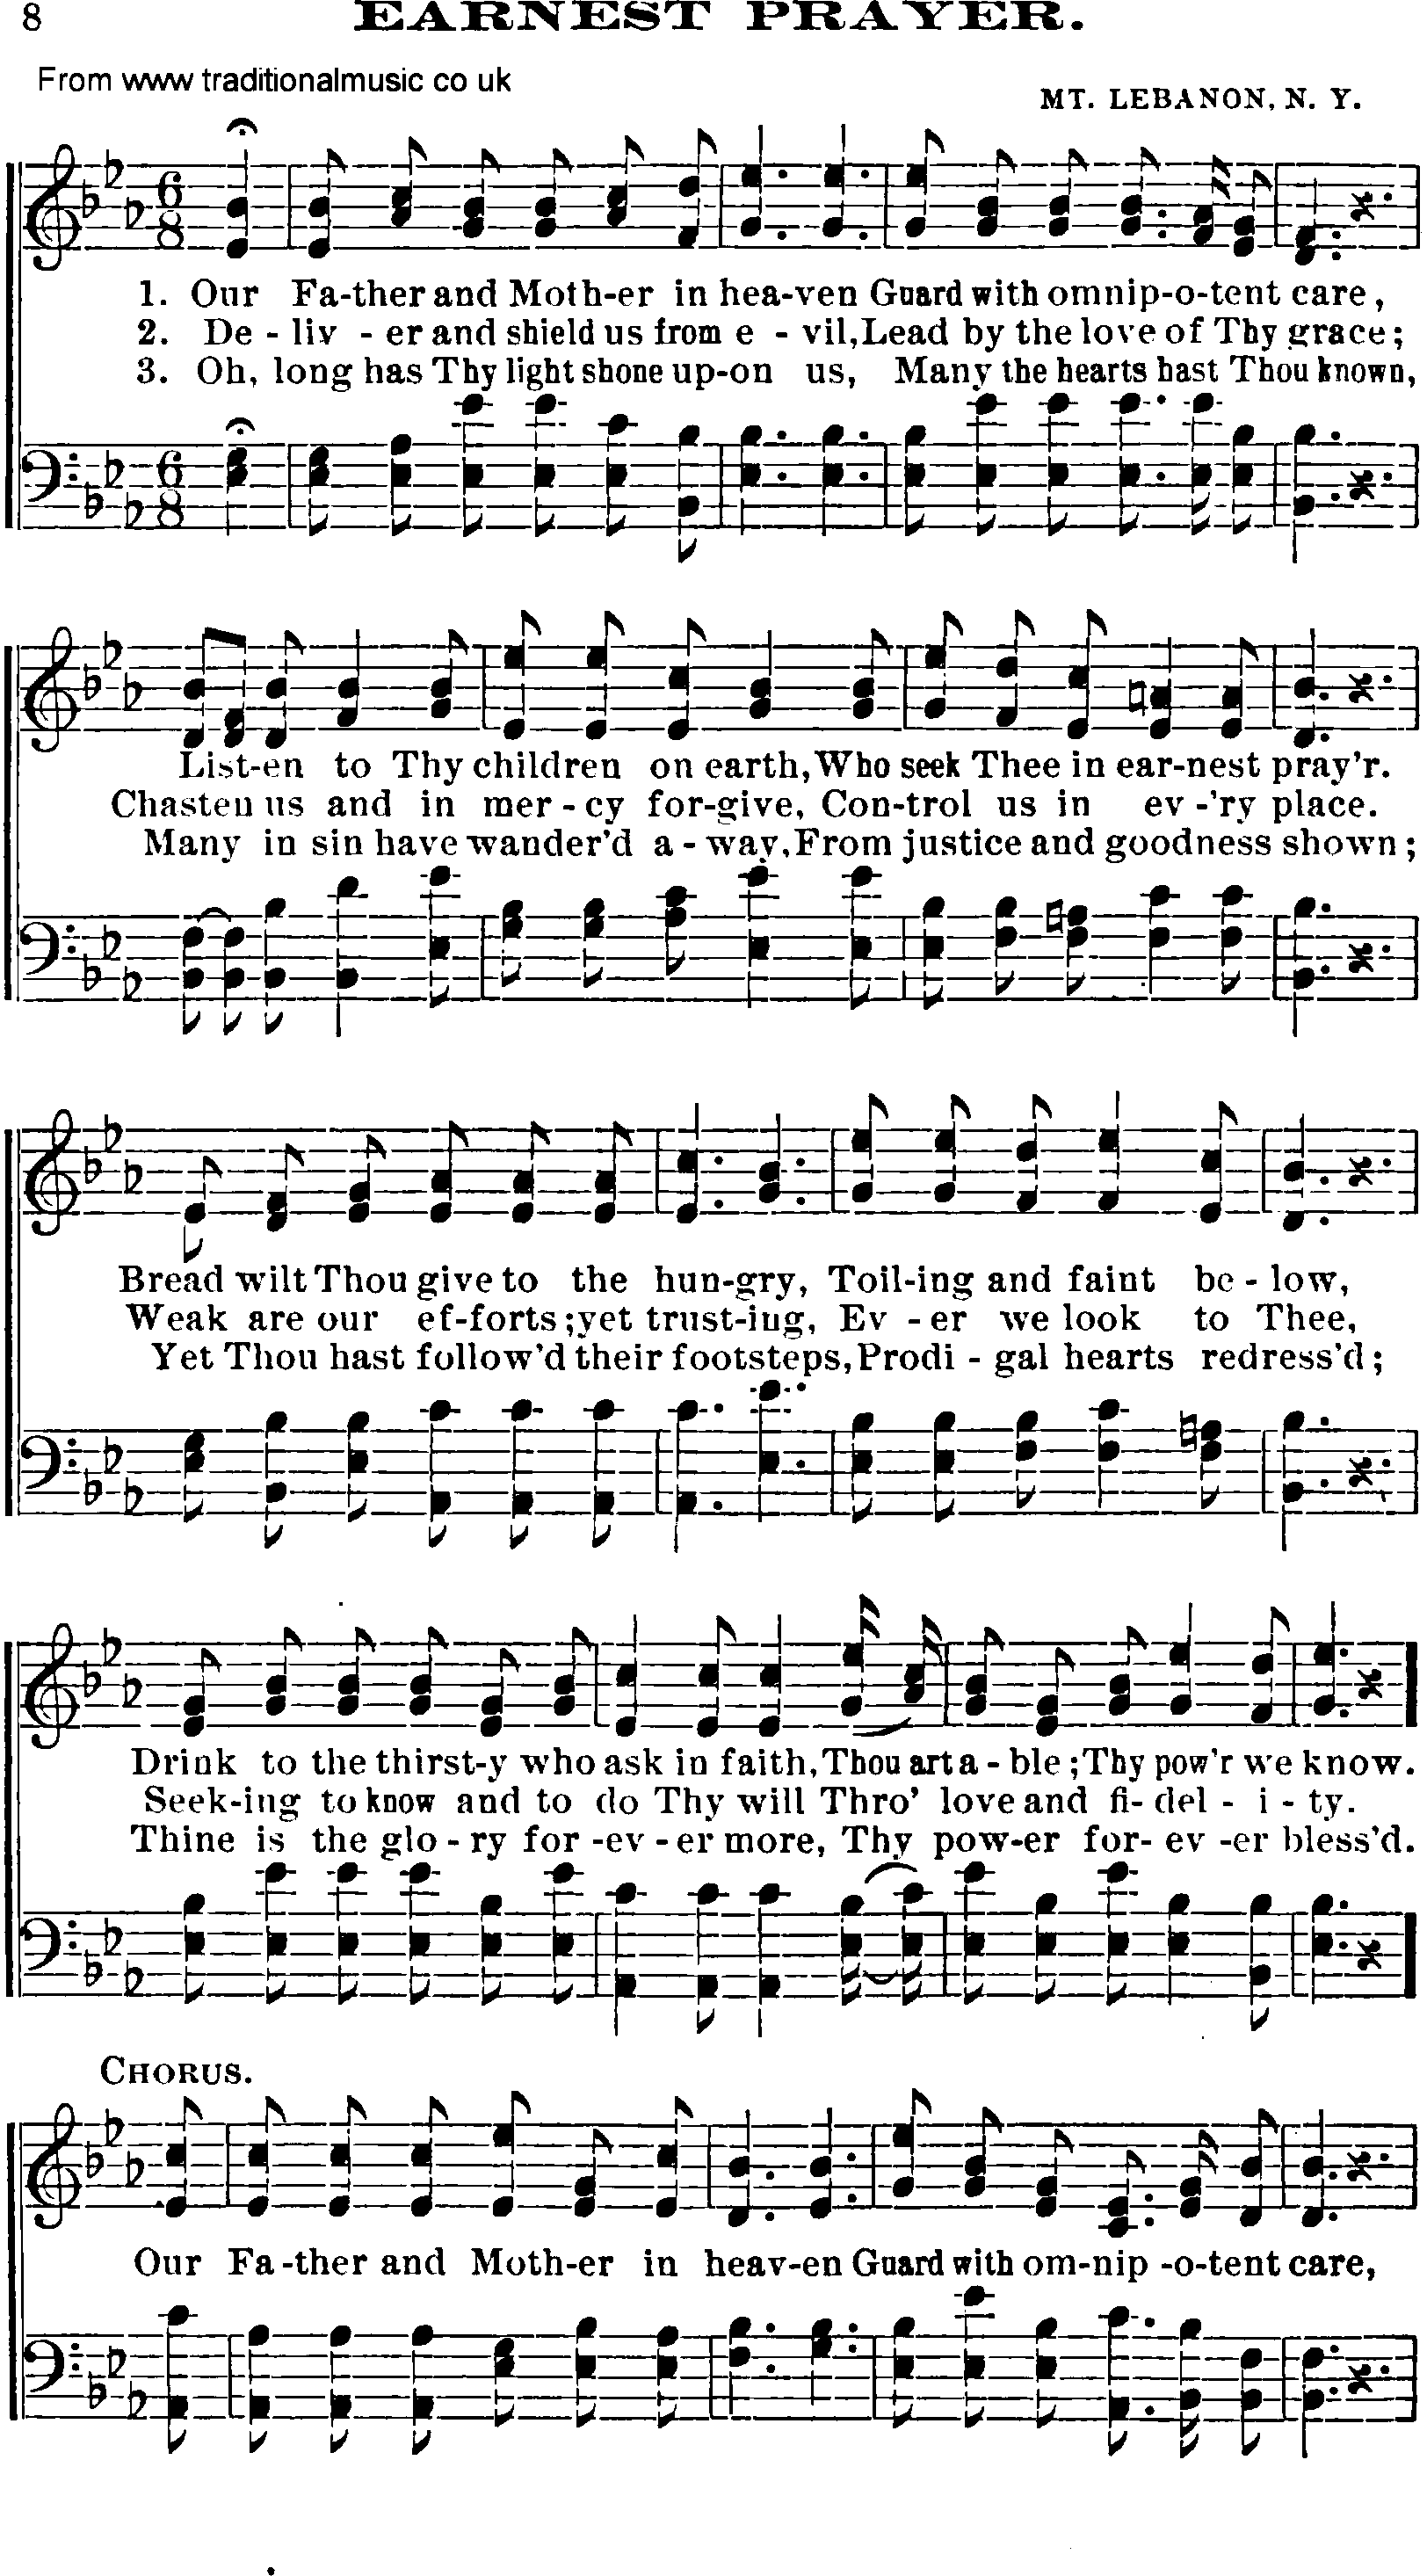 Shaker Music collection, Hymn: earnest prayer, sheetmusic and PDF